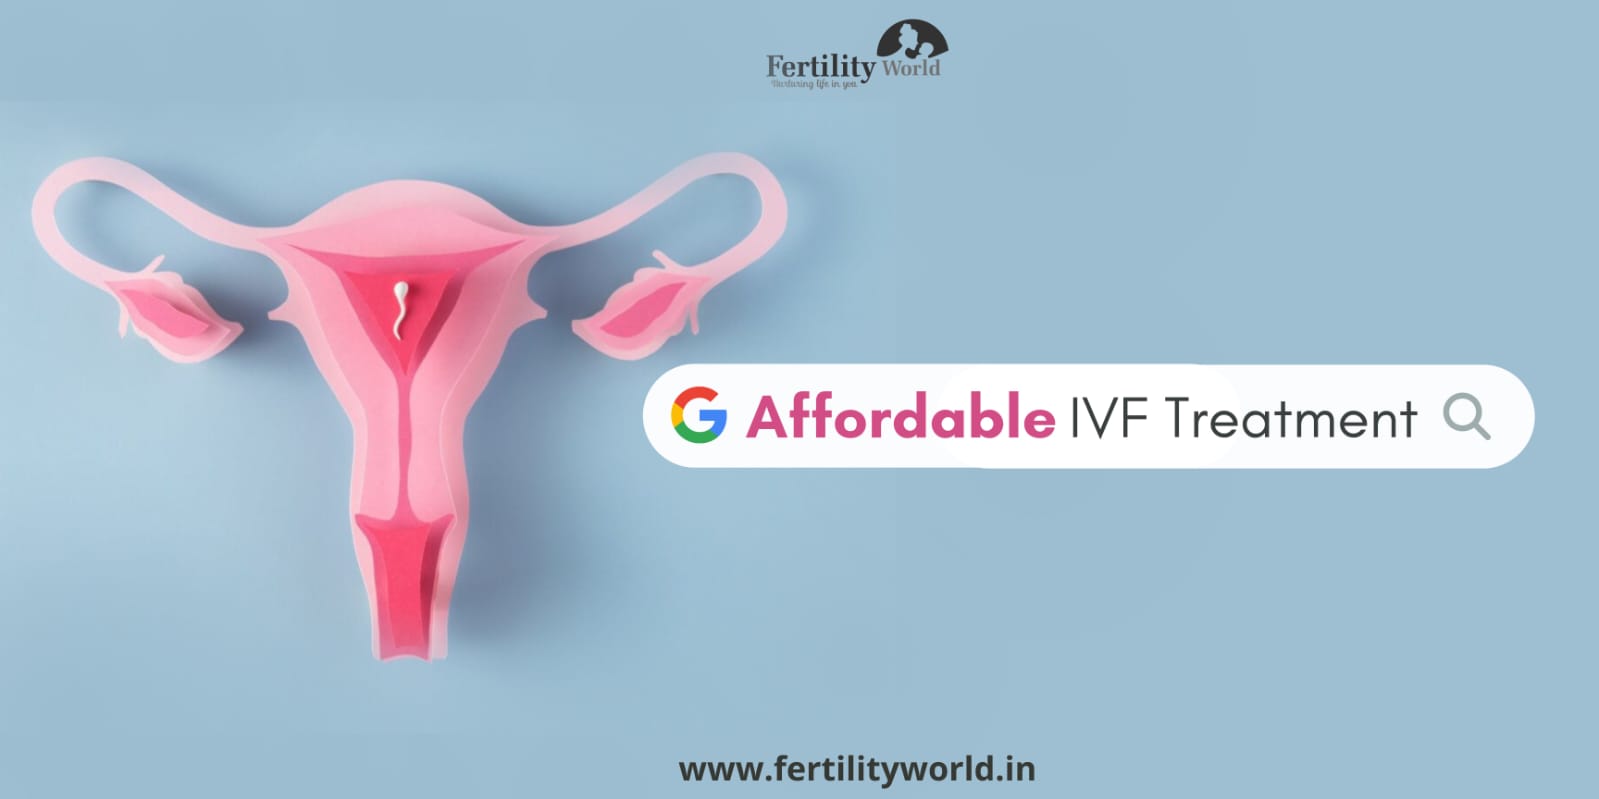 Where do I get affordable IVF treatment in the USA?